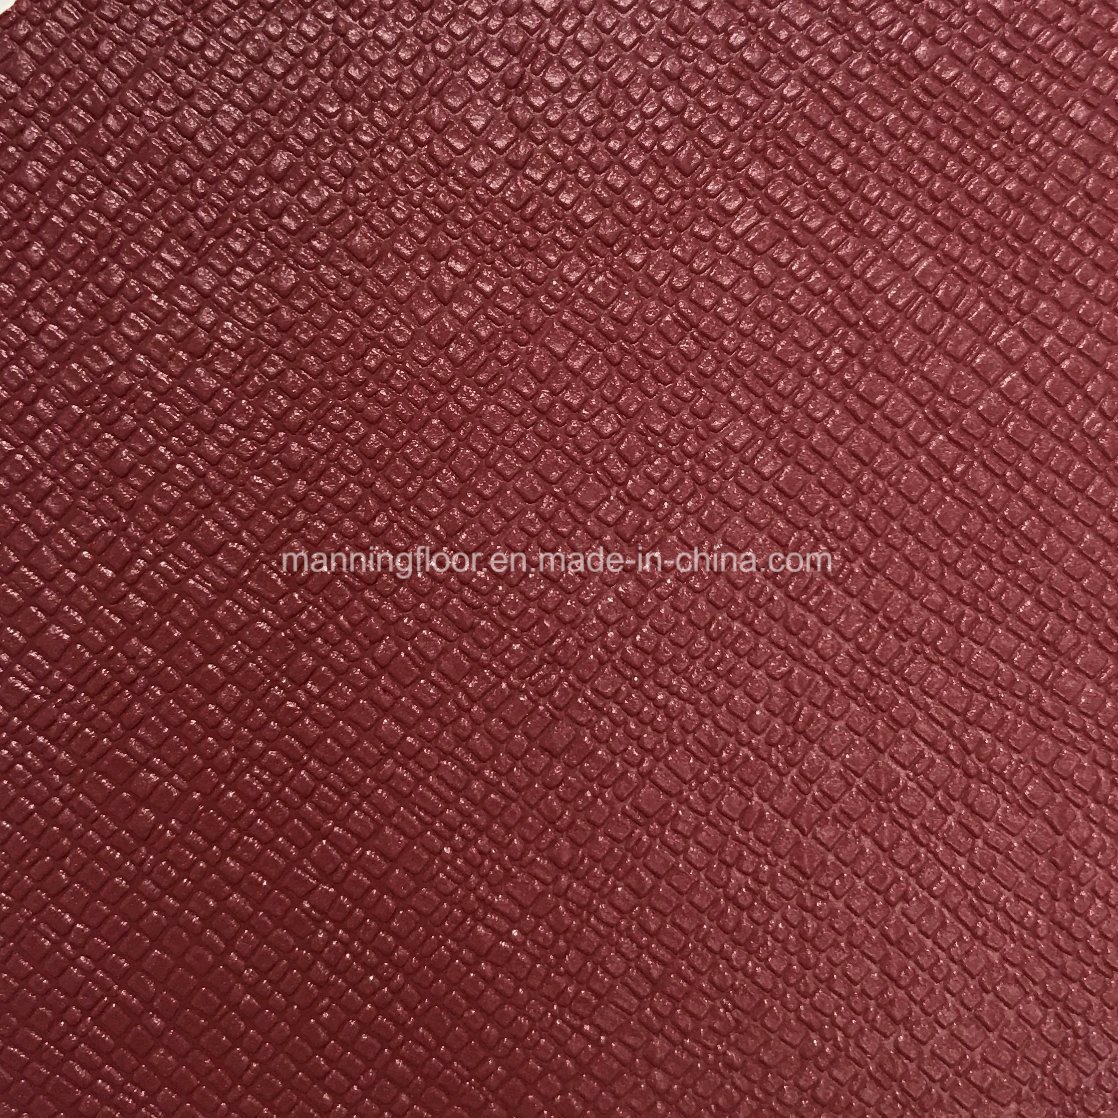 High-Quality Maroon PVC Vinyl Sports Flooring for Table Tennis Court with Ce Certificate 7mm